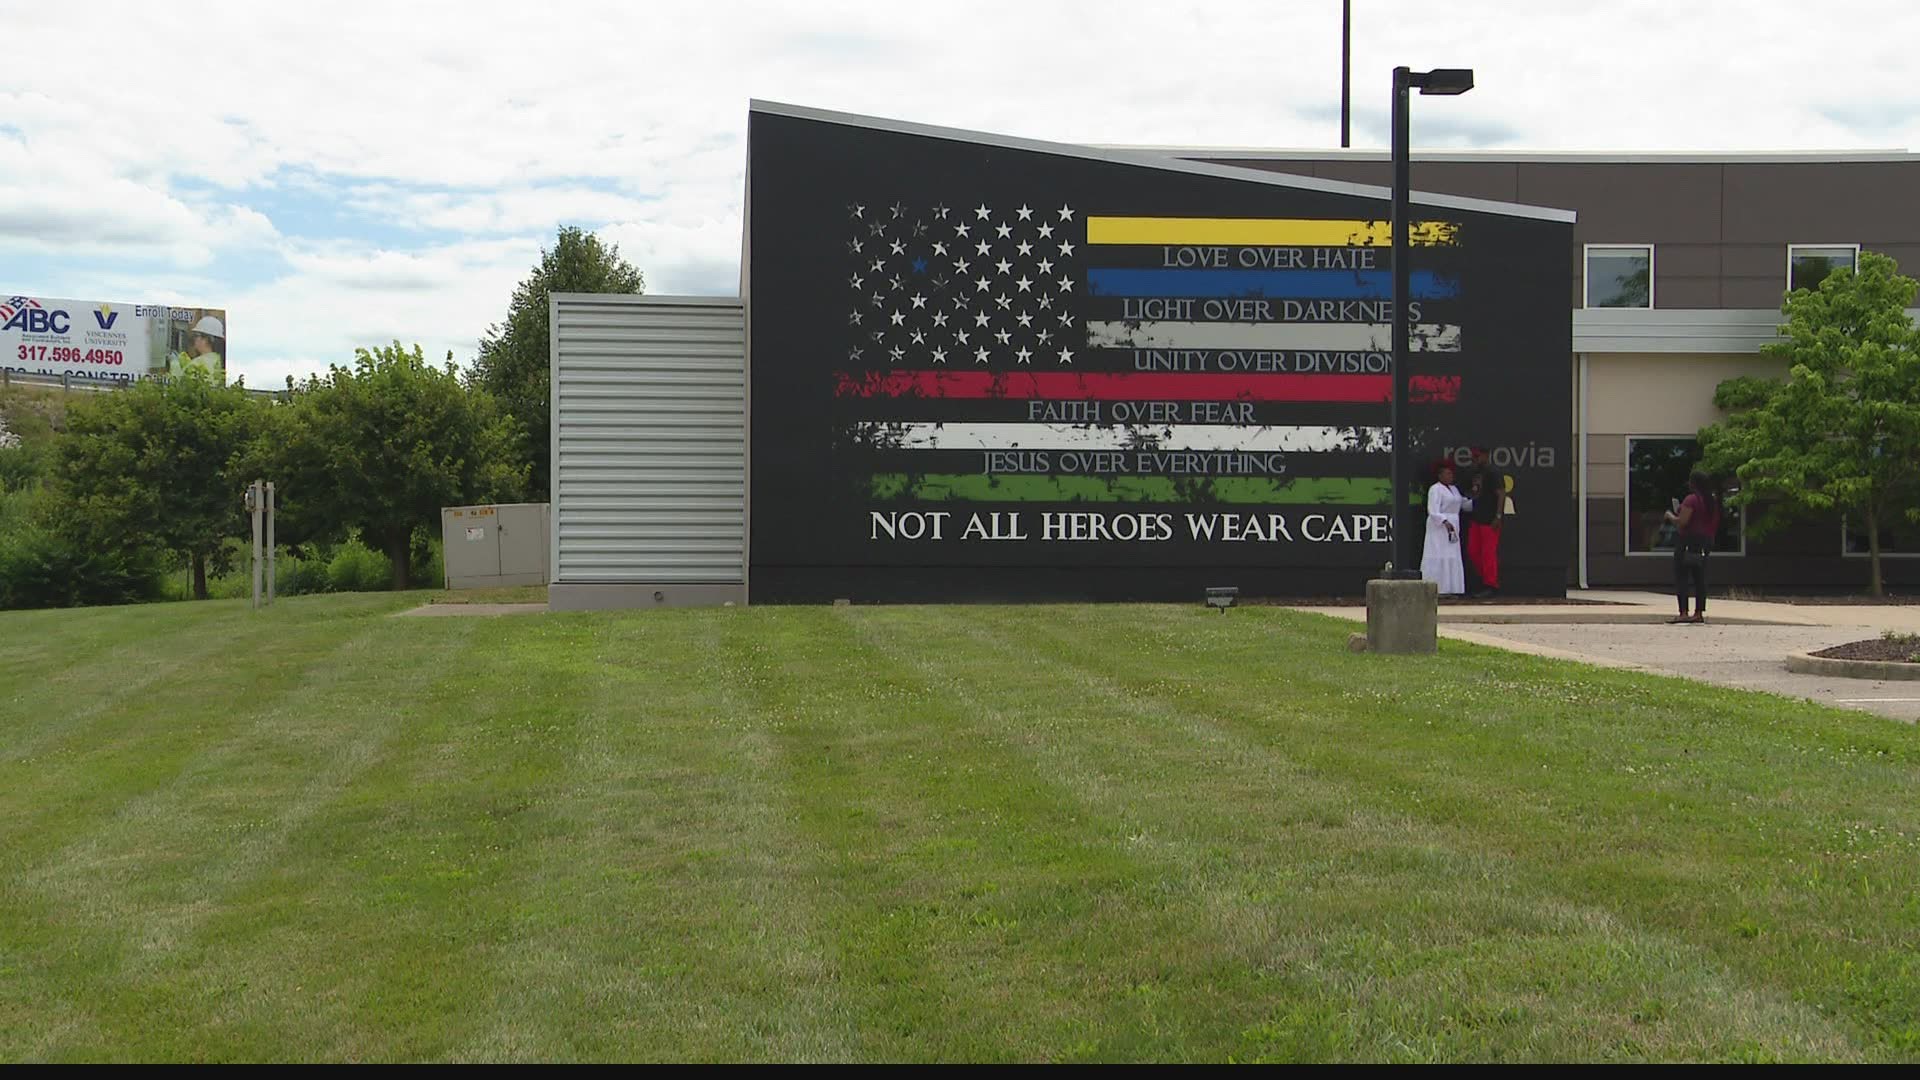 There is new artwork grabbing the attention of drivers along I-465 on Indy's east side.